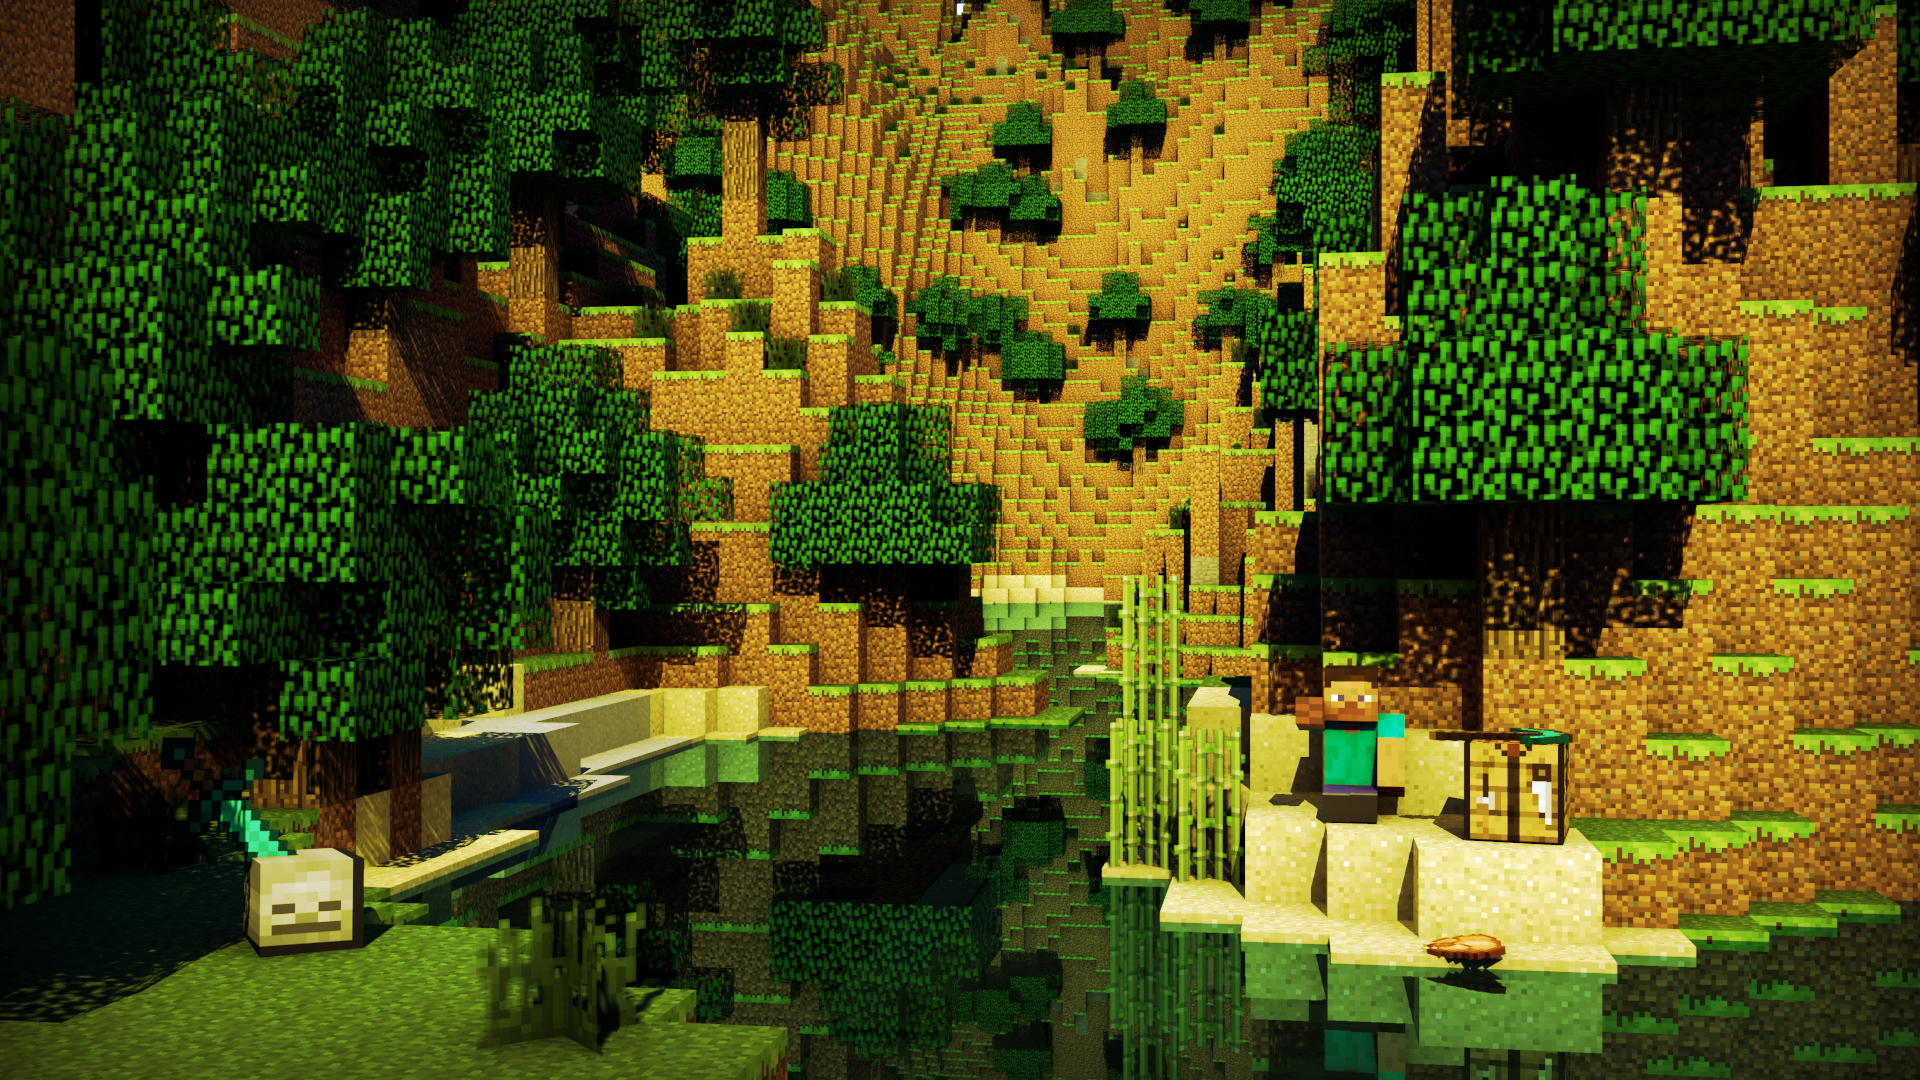 Free Download Download Minecraft Creeper Hd Wallpaper 3751 Full Size 1920x1080 For Your Desktop Mobile Tablet Explore 48 Wallpaper Minecraft Hd Awesome Minecraft Wallpaper Best Minecraft Wallpapers Minecraft Wallpapers For Your Computer